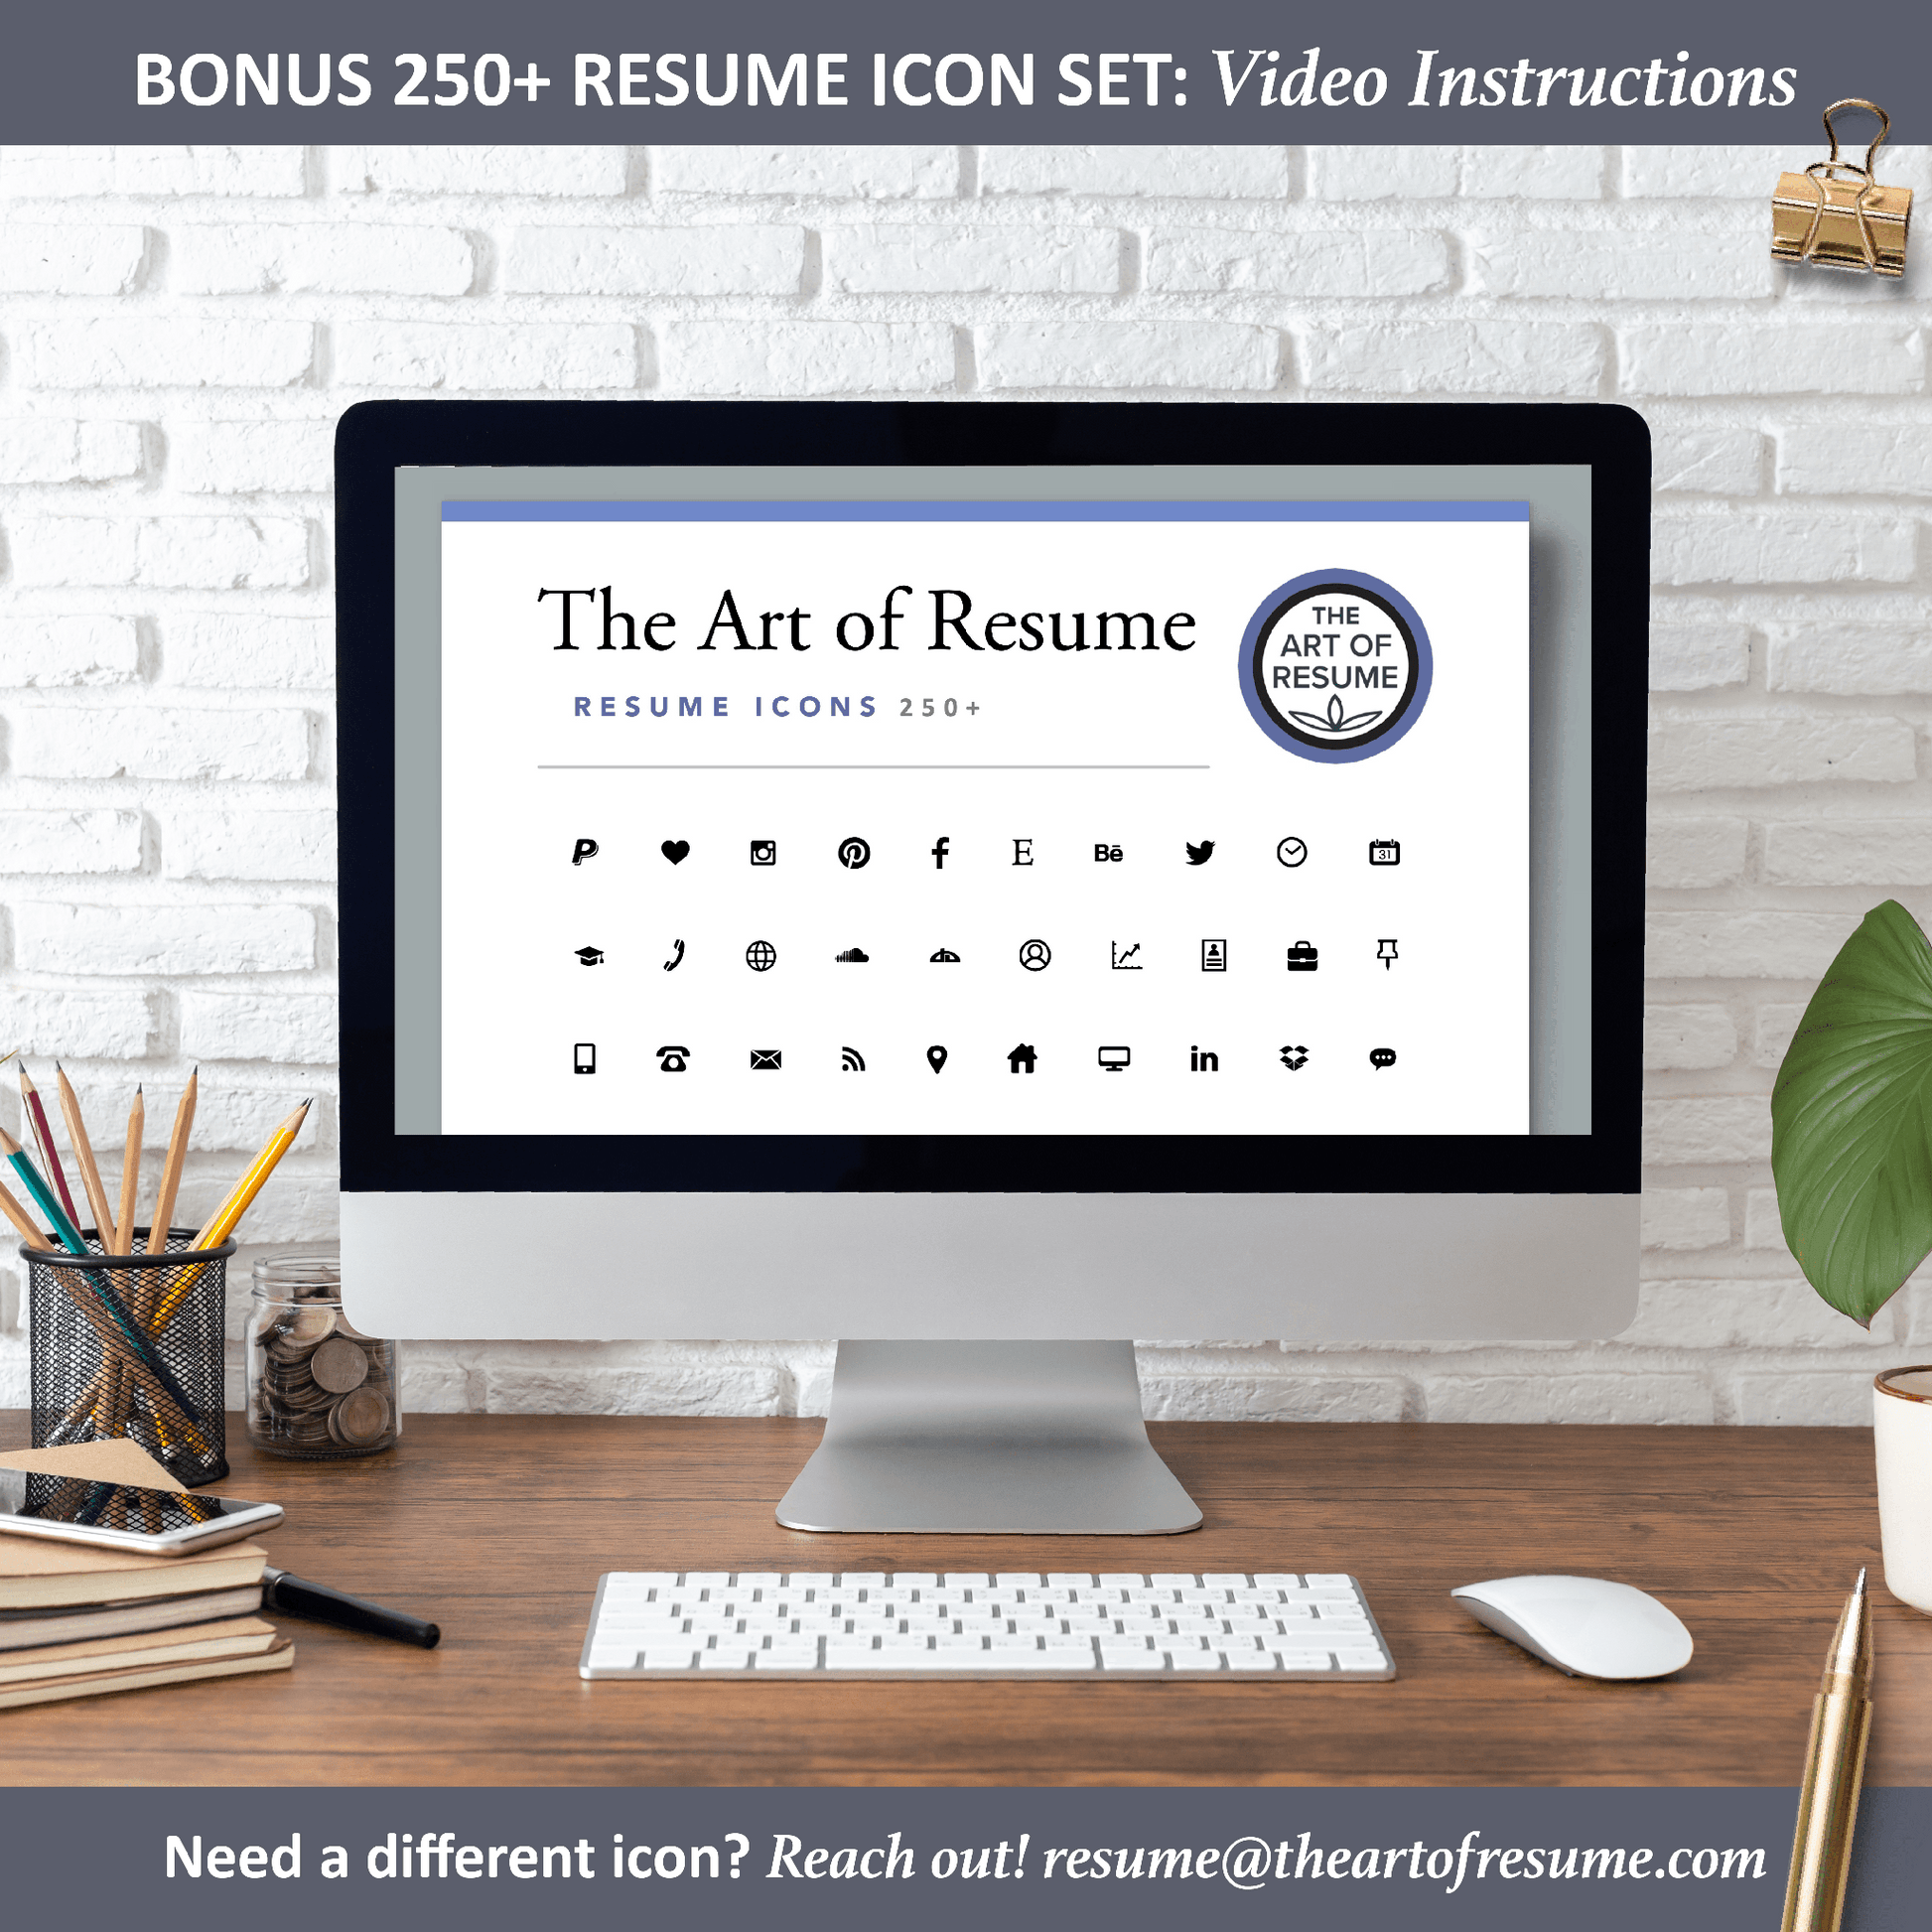 The Art of Resume Templates |  Bonus 250 Free Professional Resume CV Icons, Images PNG